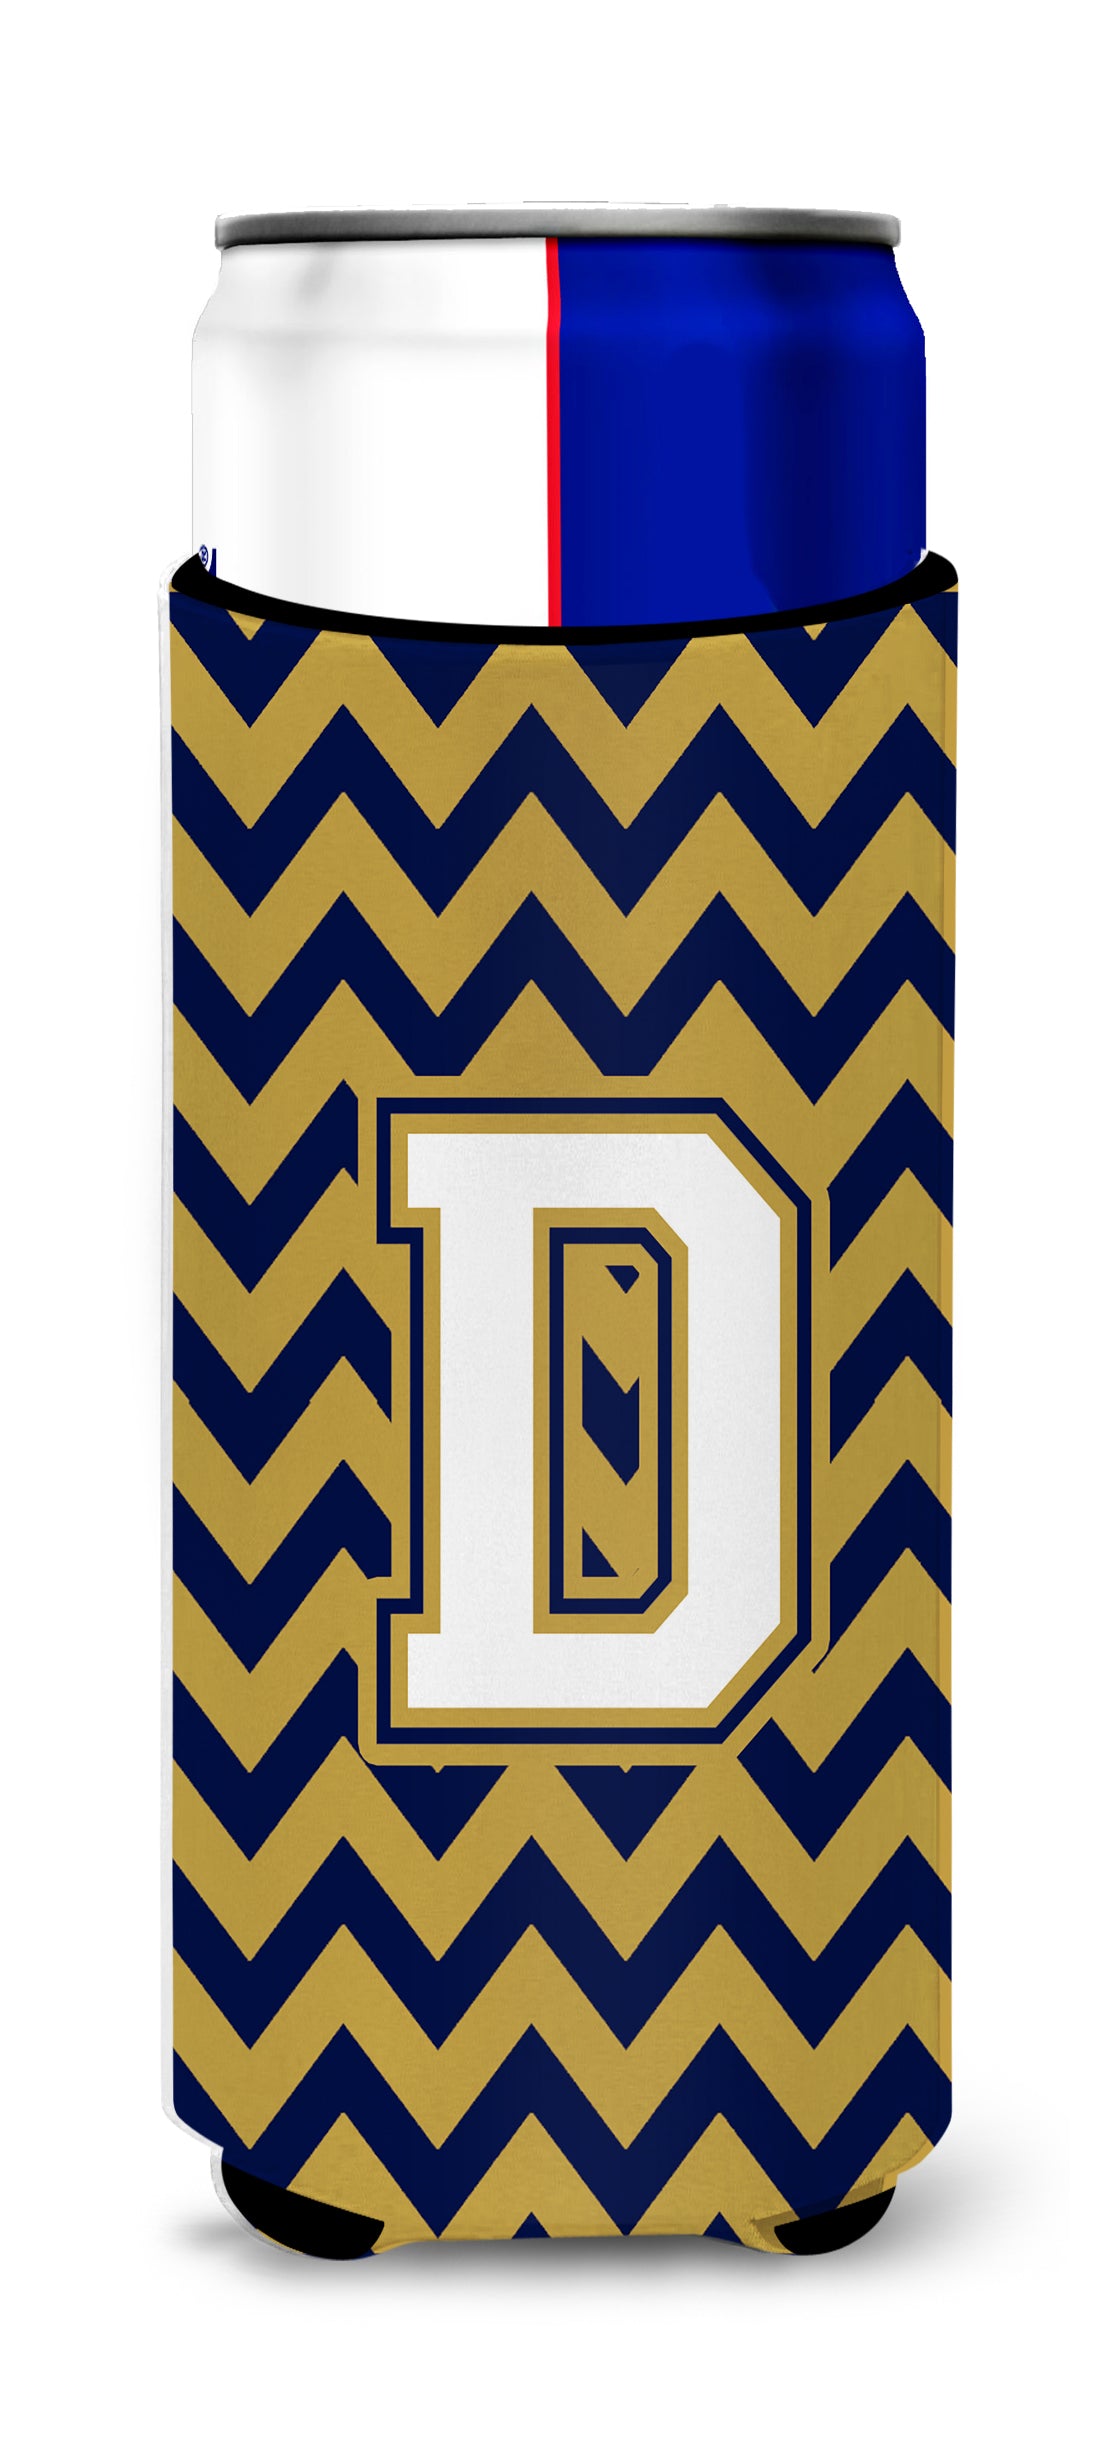 Letter D Chevron Navy Blue and Gold Ultra Beverage Insulators for slim cans CJ1057-DMUK